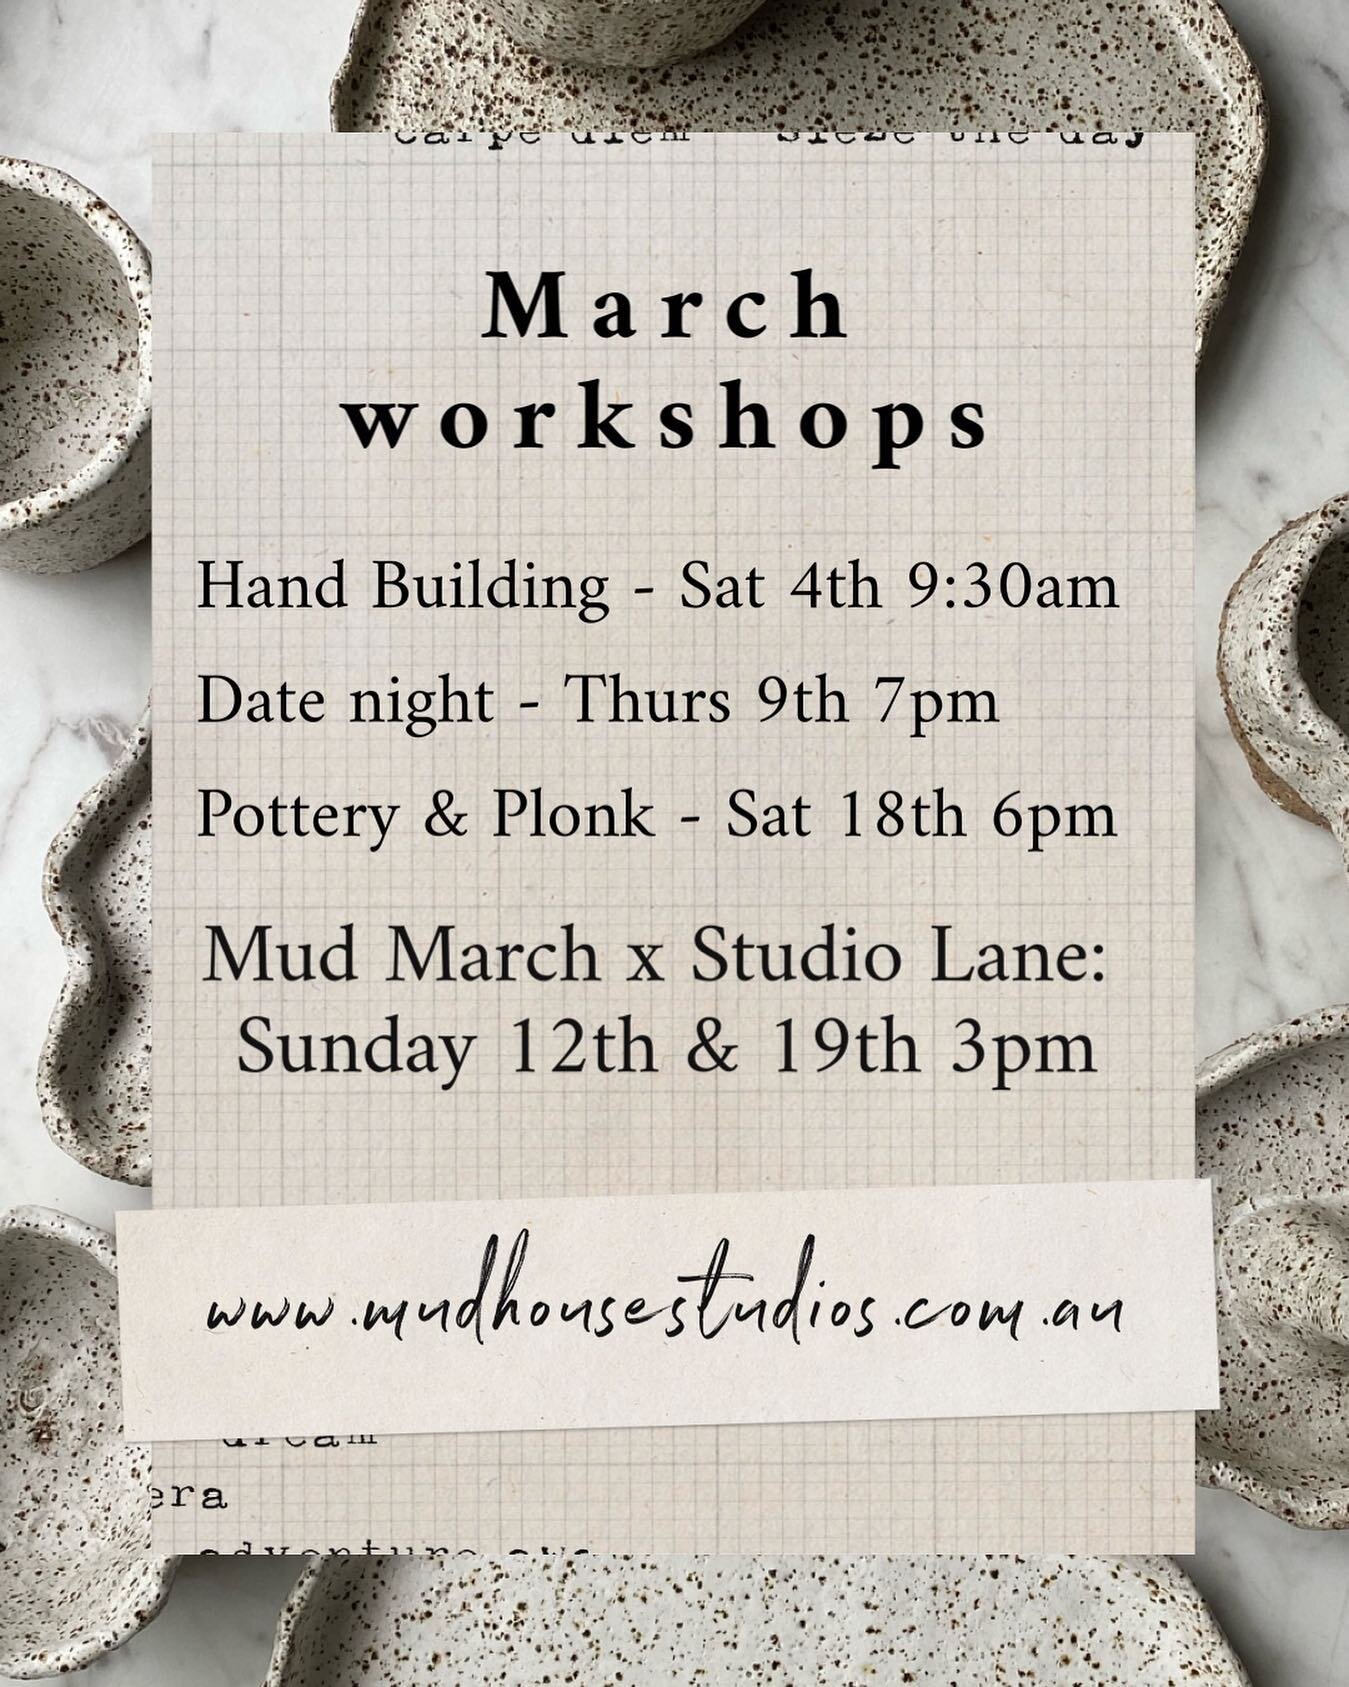 March workshops dates. This month I&rsquo;ve added 2 new workshops that will be held at Studio Lane in Erina. If you&rsquo;d like to join us for Mud March @studio__lane the booking link is in our bios. Hope to see you there 🙏🏼